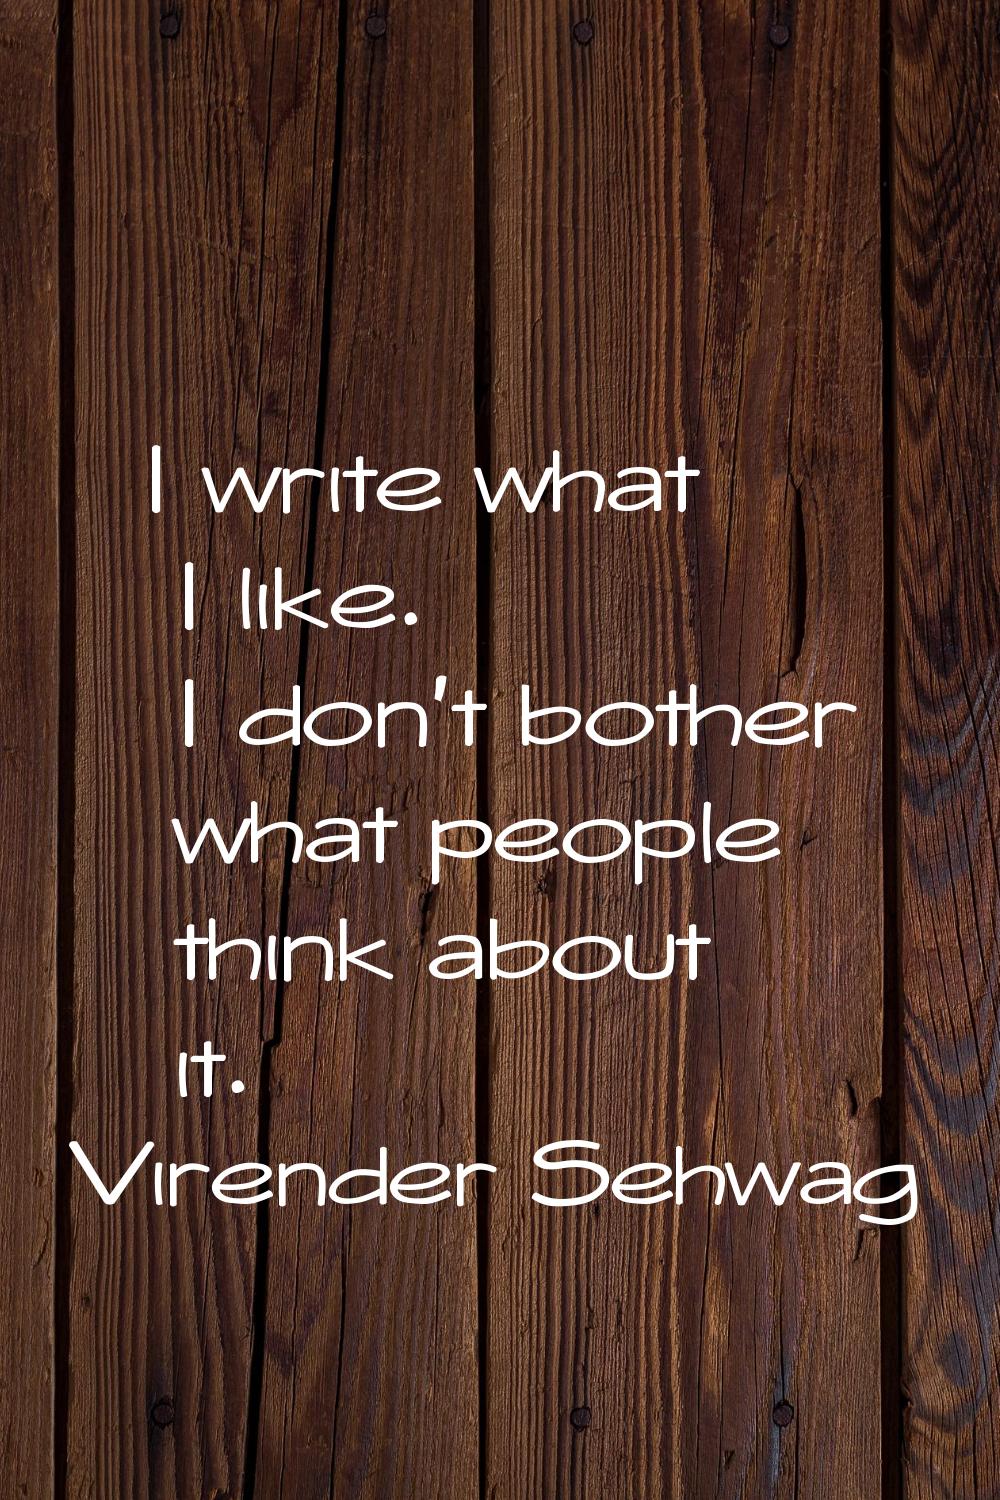 I write what I like. I don't bother what people think about it.